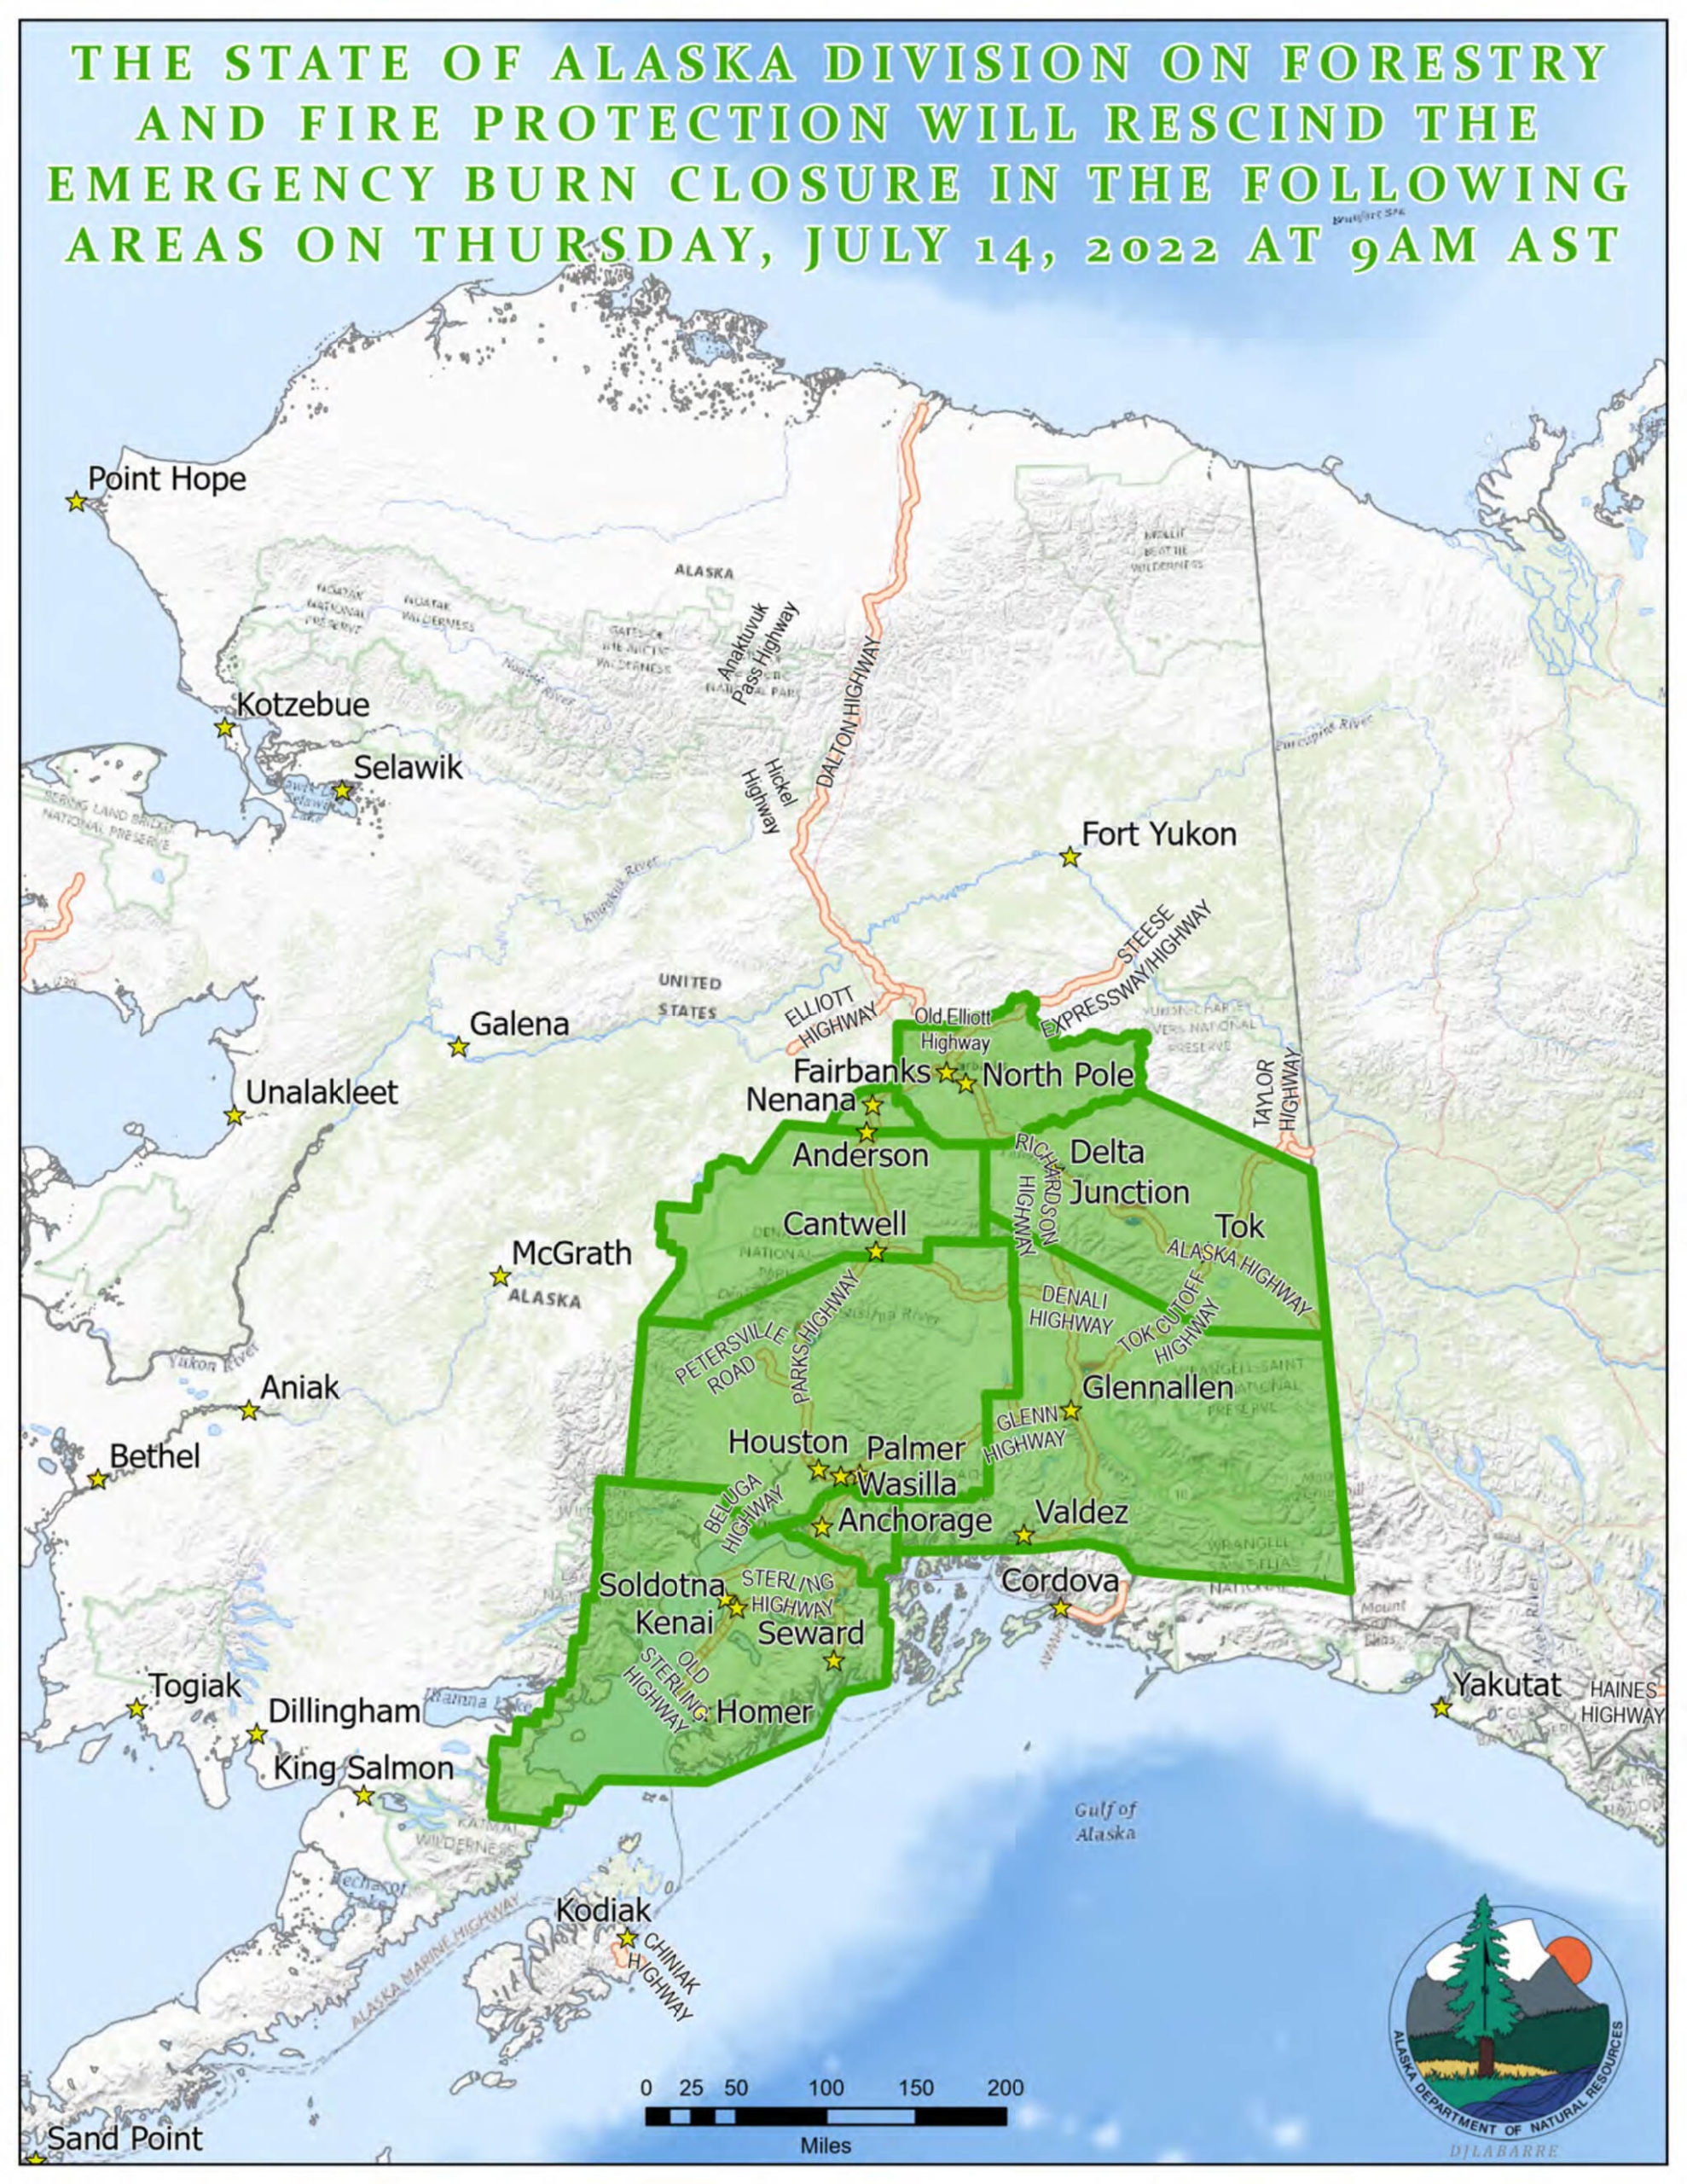 The Alaska State Department of Natural Resources is rescinding the emergency burn suspension for these areas on Thursday, July 14, 2022, citing a decrease in fire danger from recent rain showers. (Image via DNR)